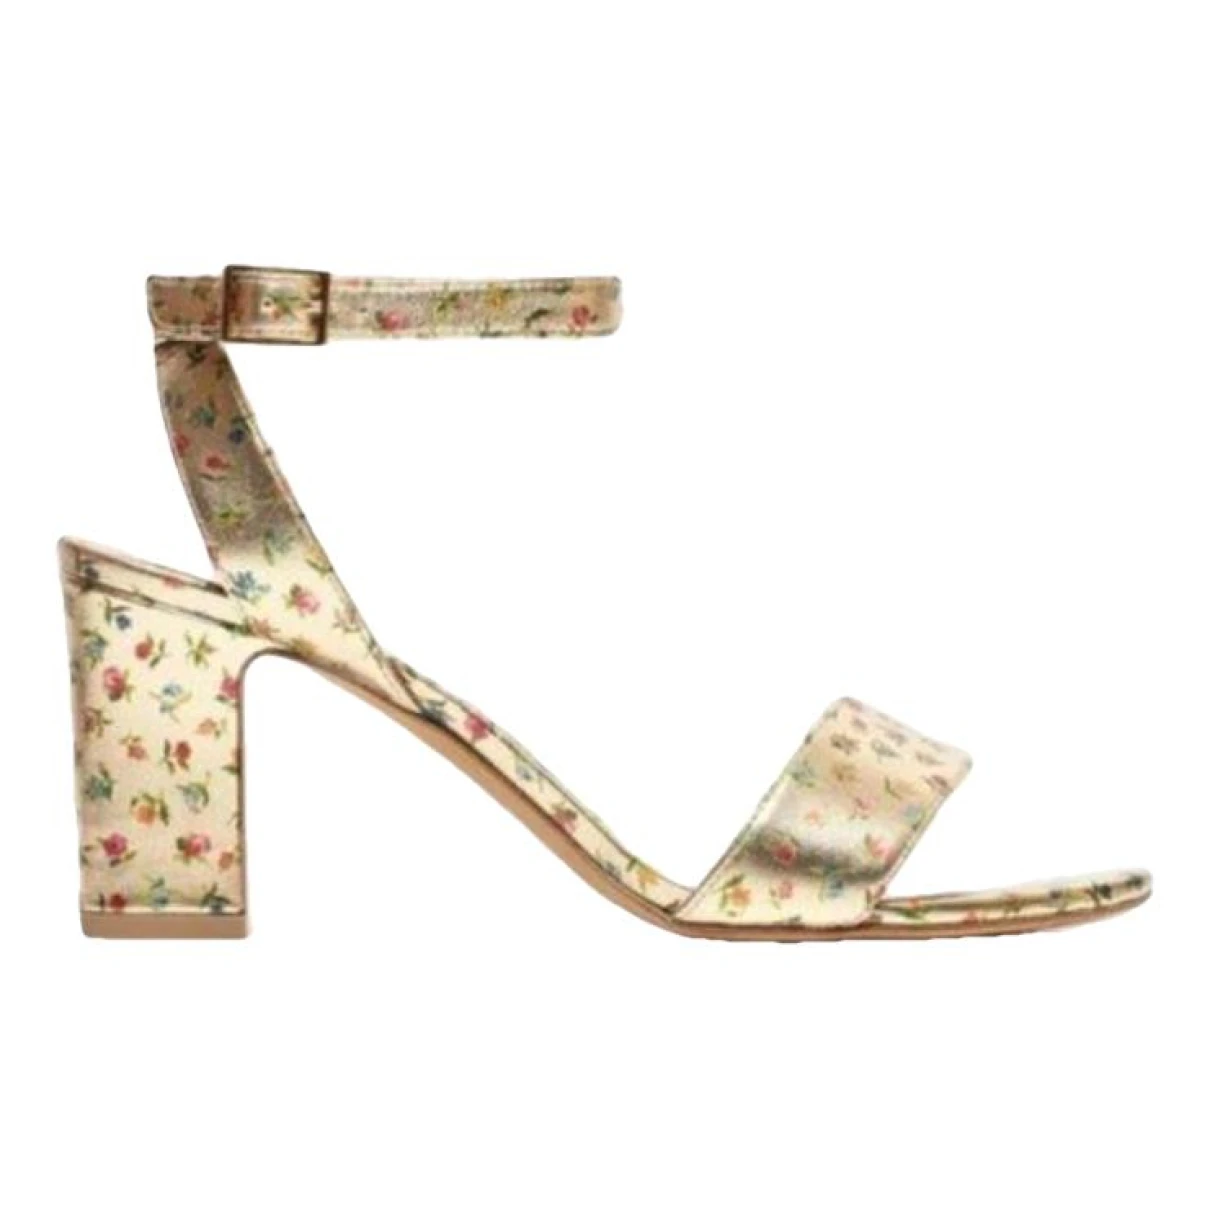 Pre-owned Tabitha Simmons Leather Sandal In Gold